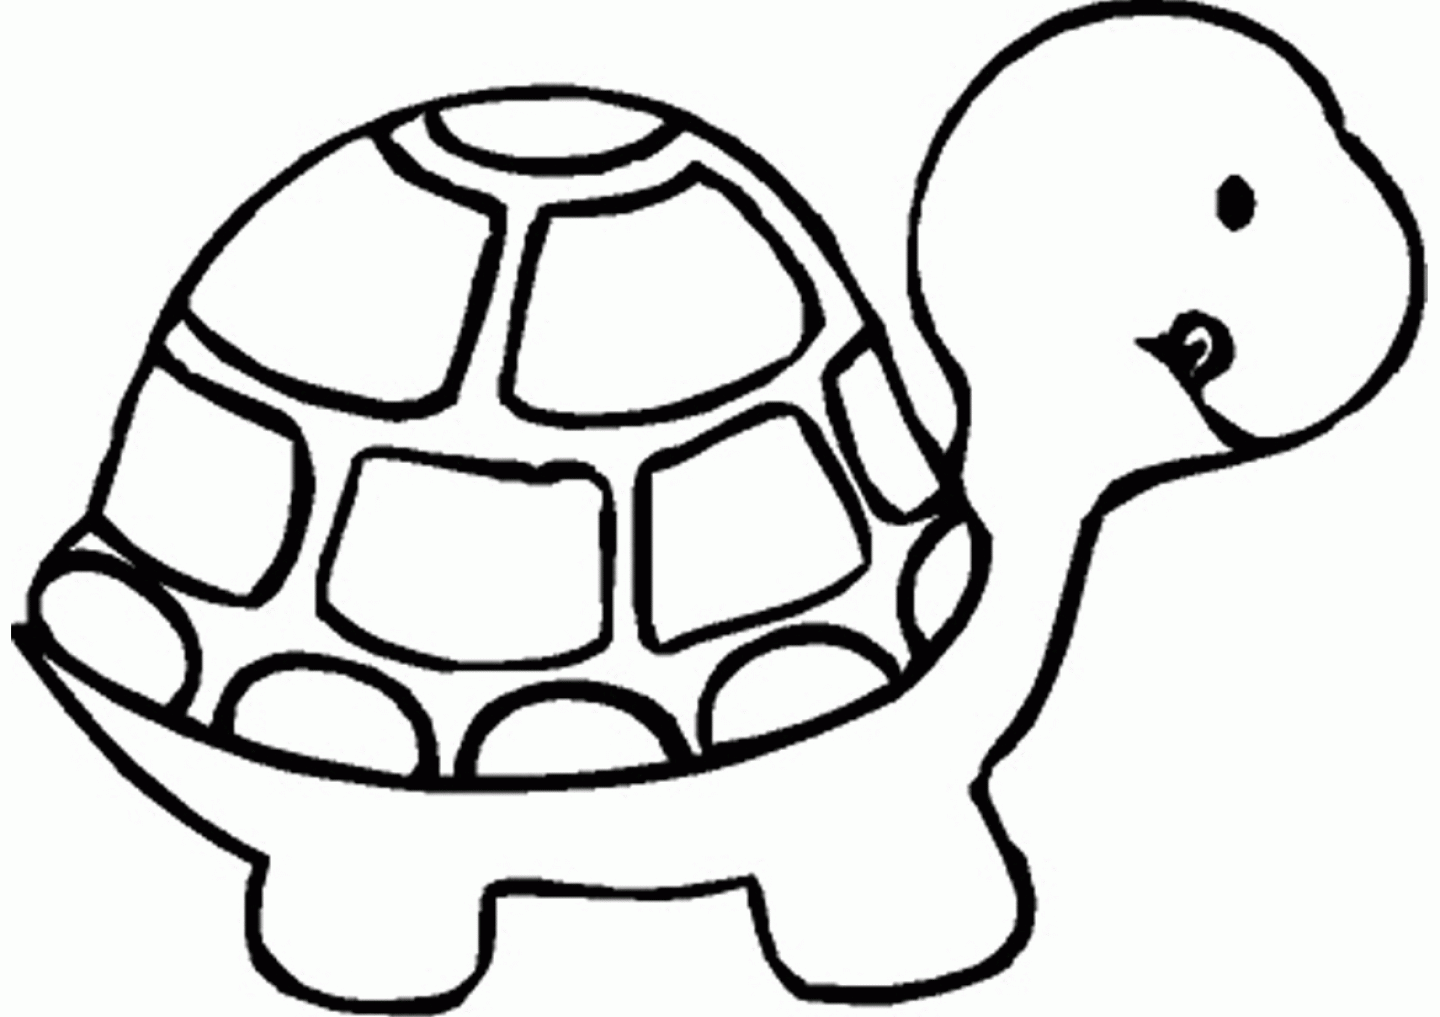 All Drawing Coloring Pages - Coloring Pages For All Ages